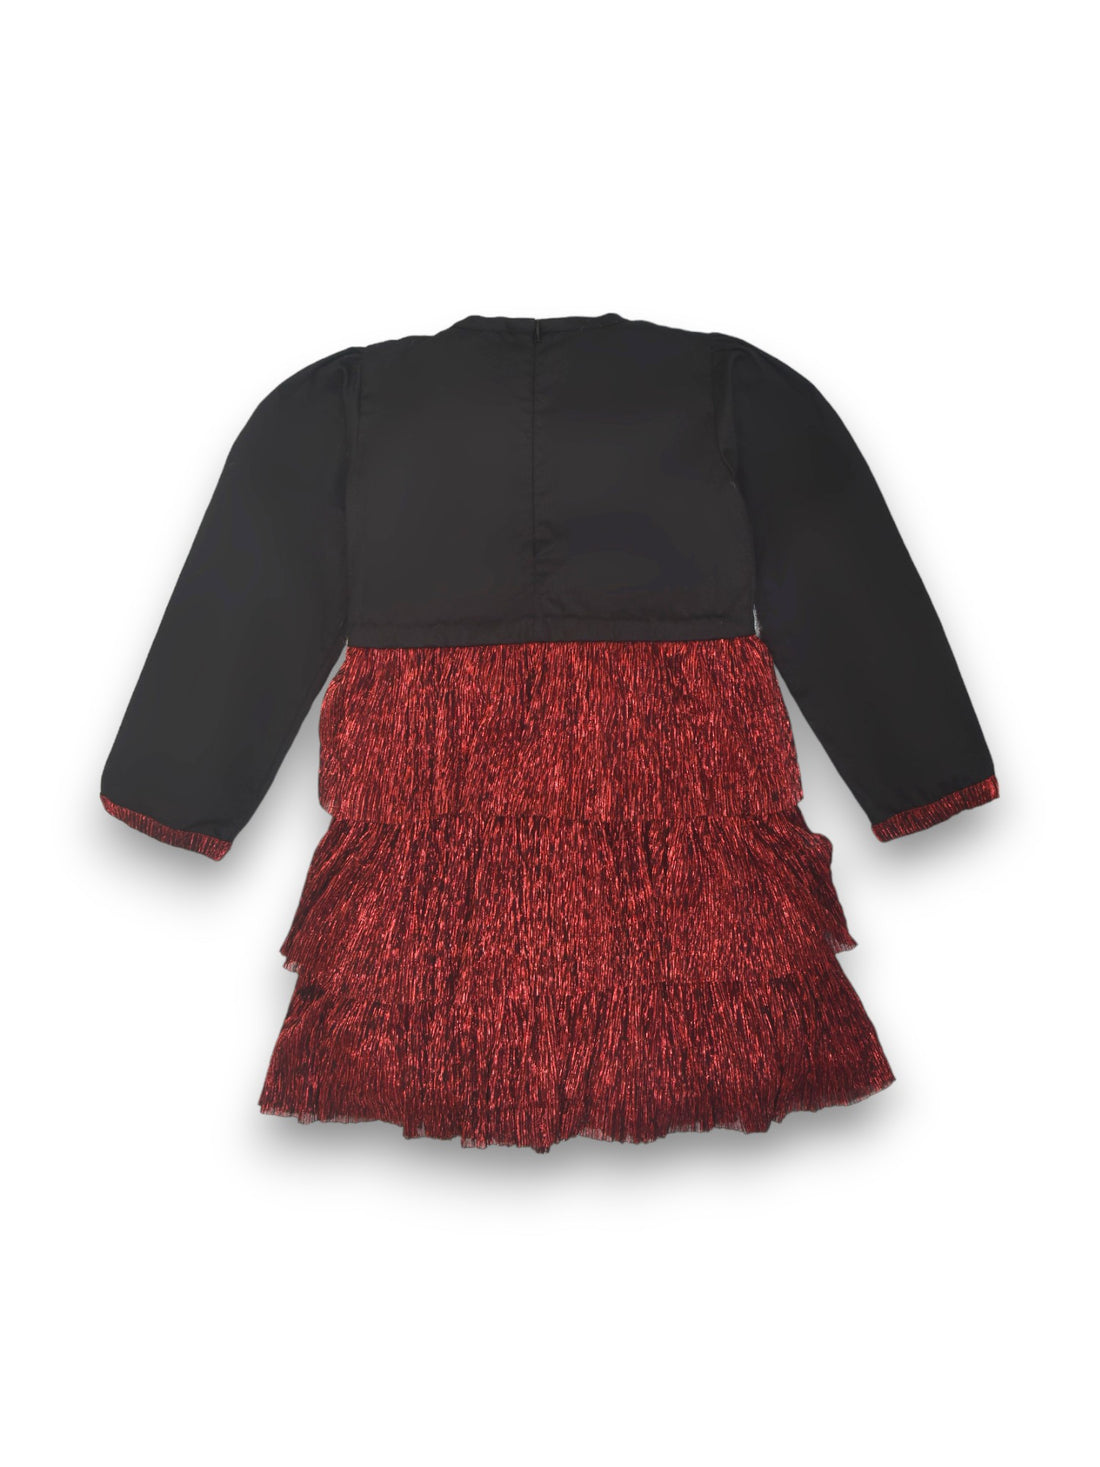 Black and Red Frill Dress Embracing a Bold Heart Design